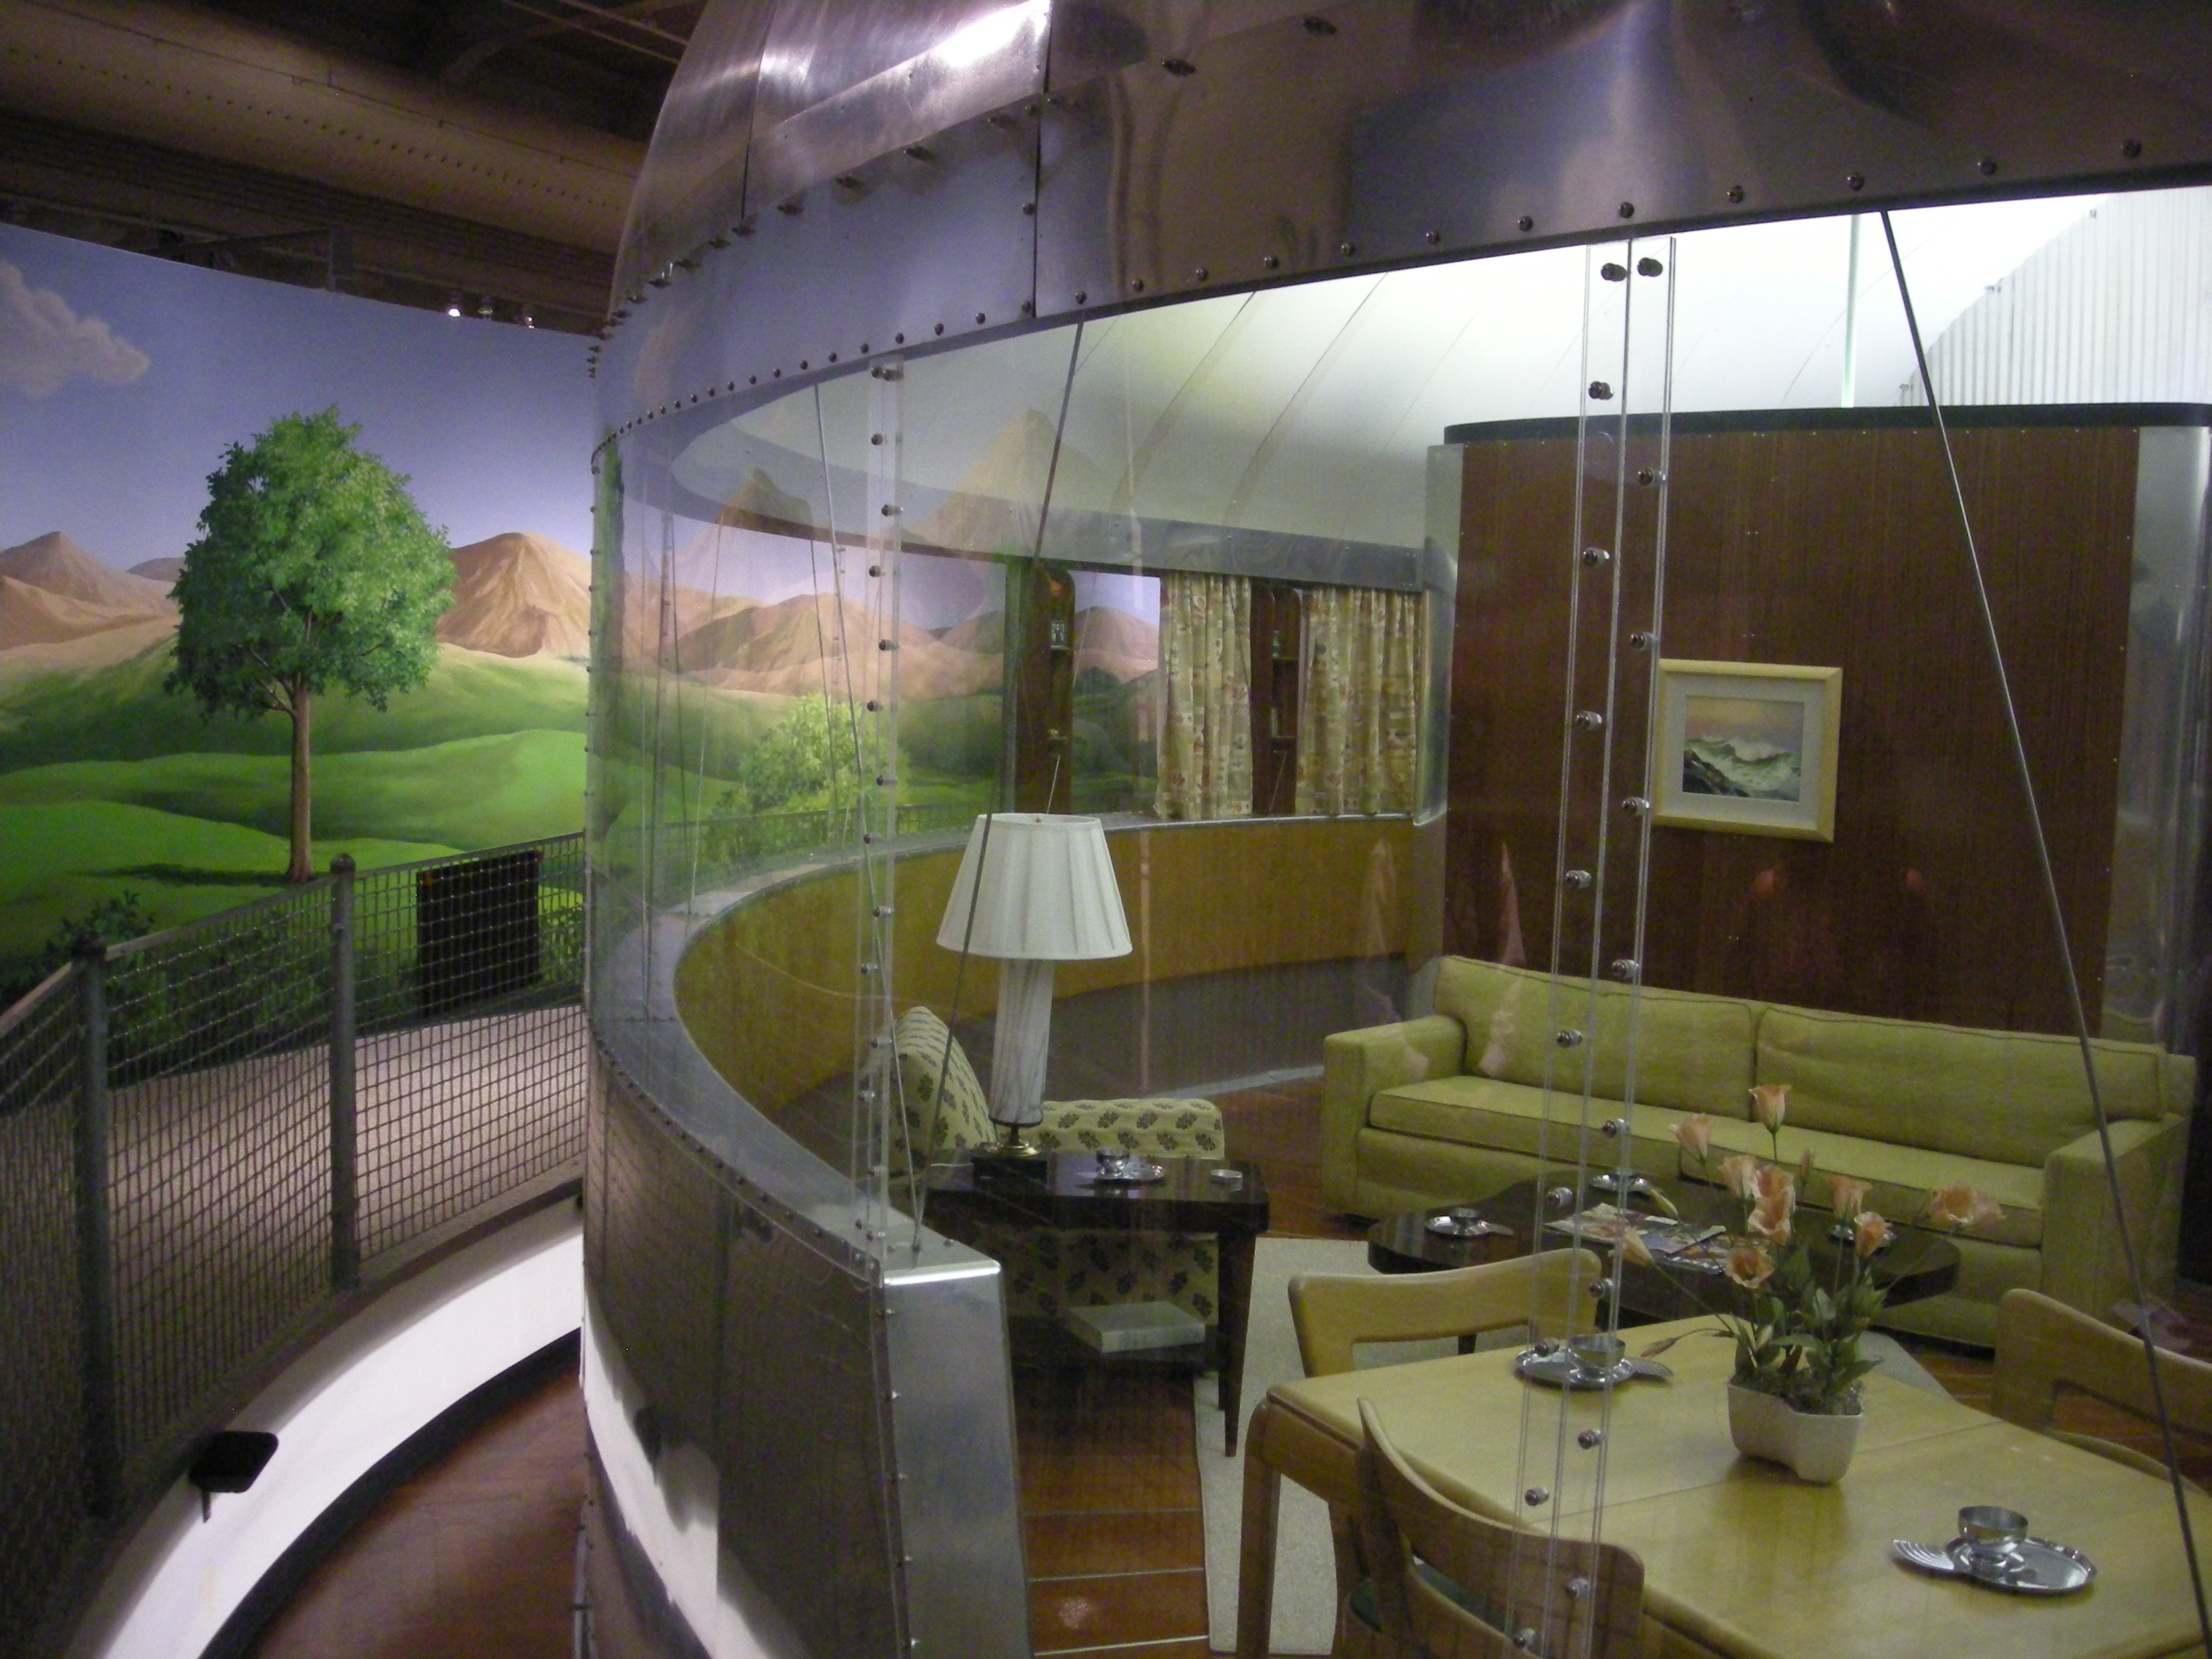 henry_ford_museum_august_2012_11_dymaxion_house